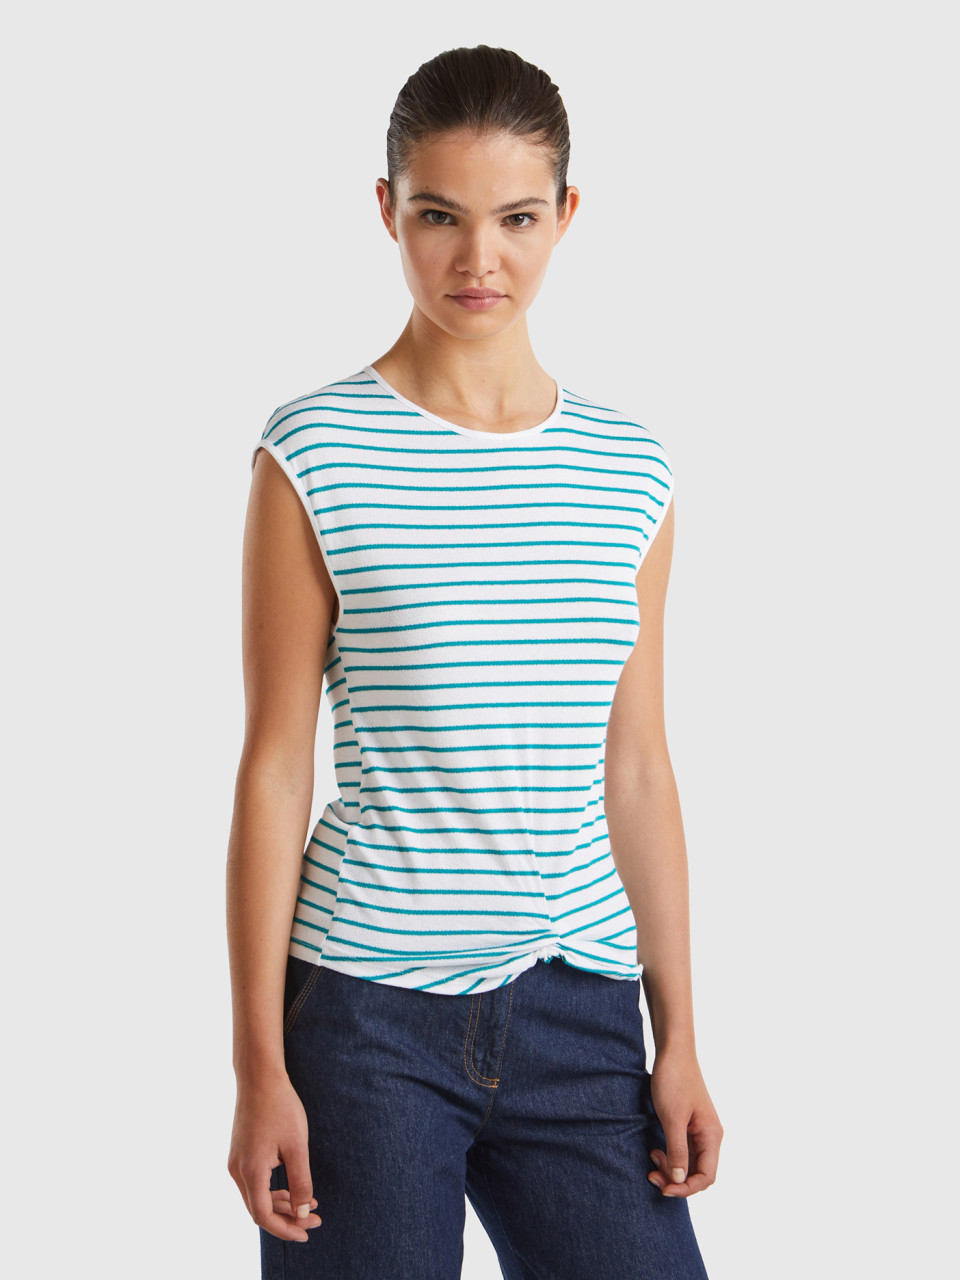 Benetton, Striped T-shirt With Knot, Teal, Women